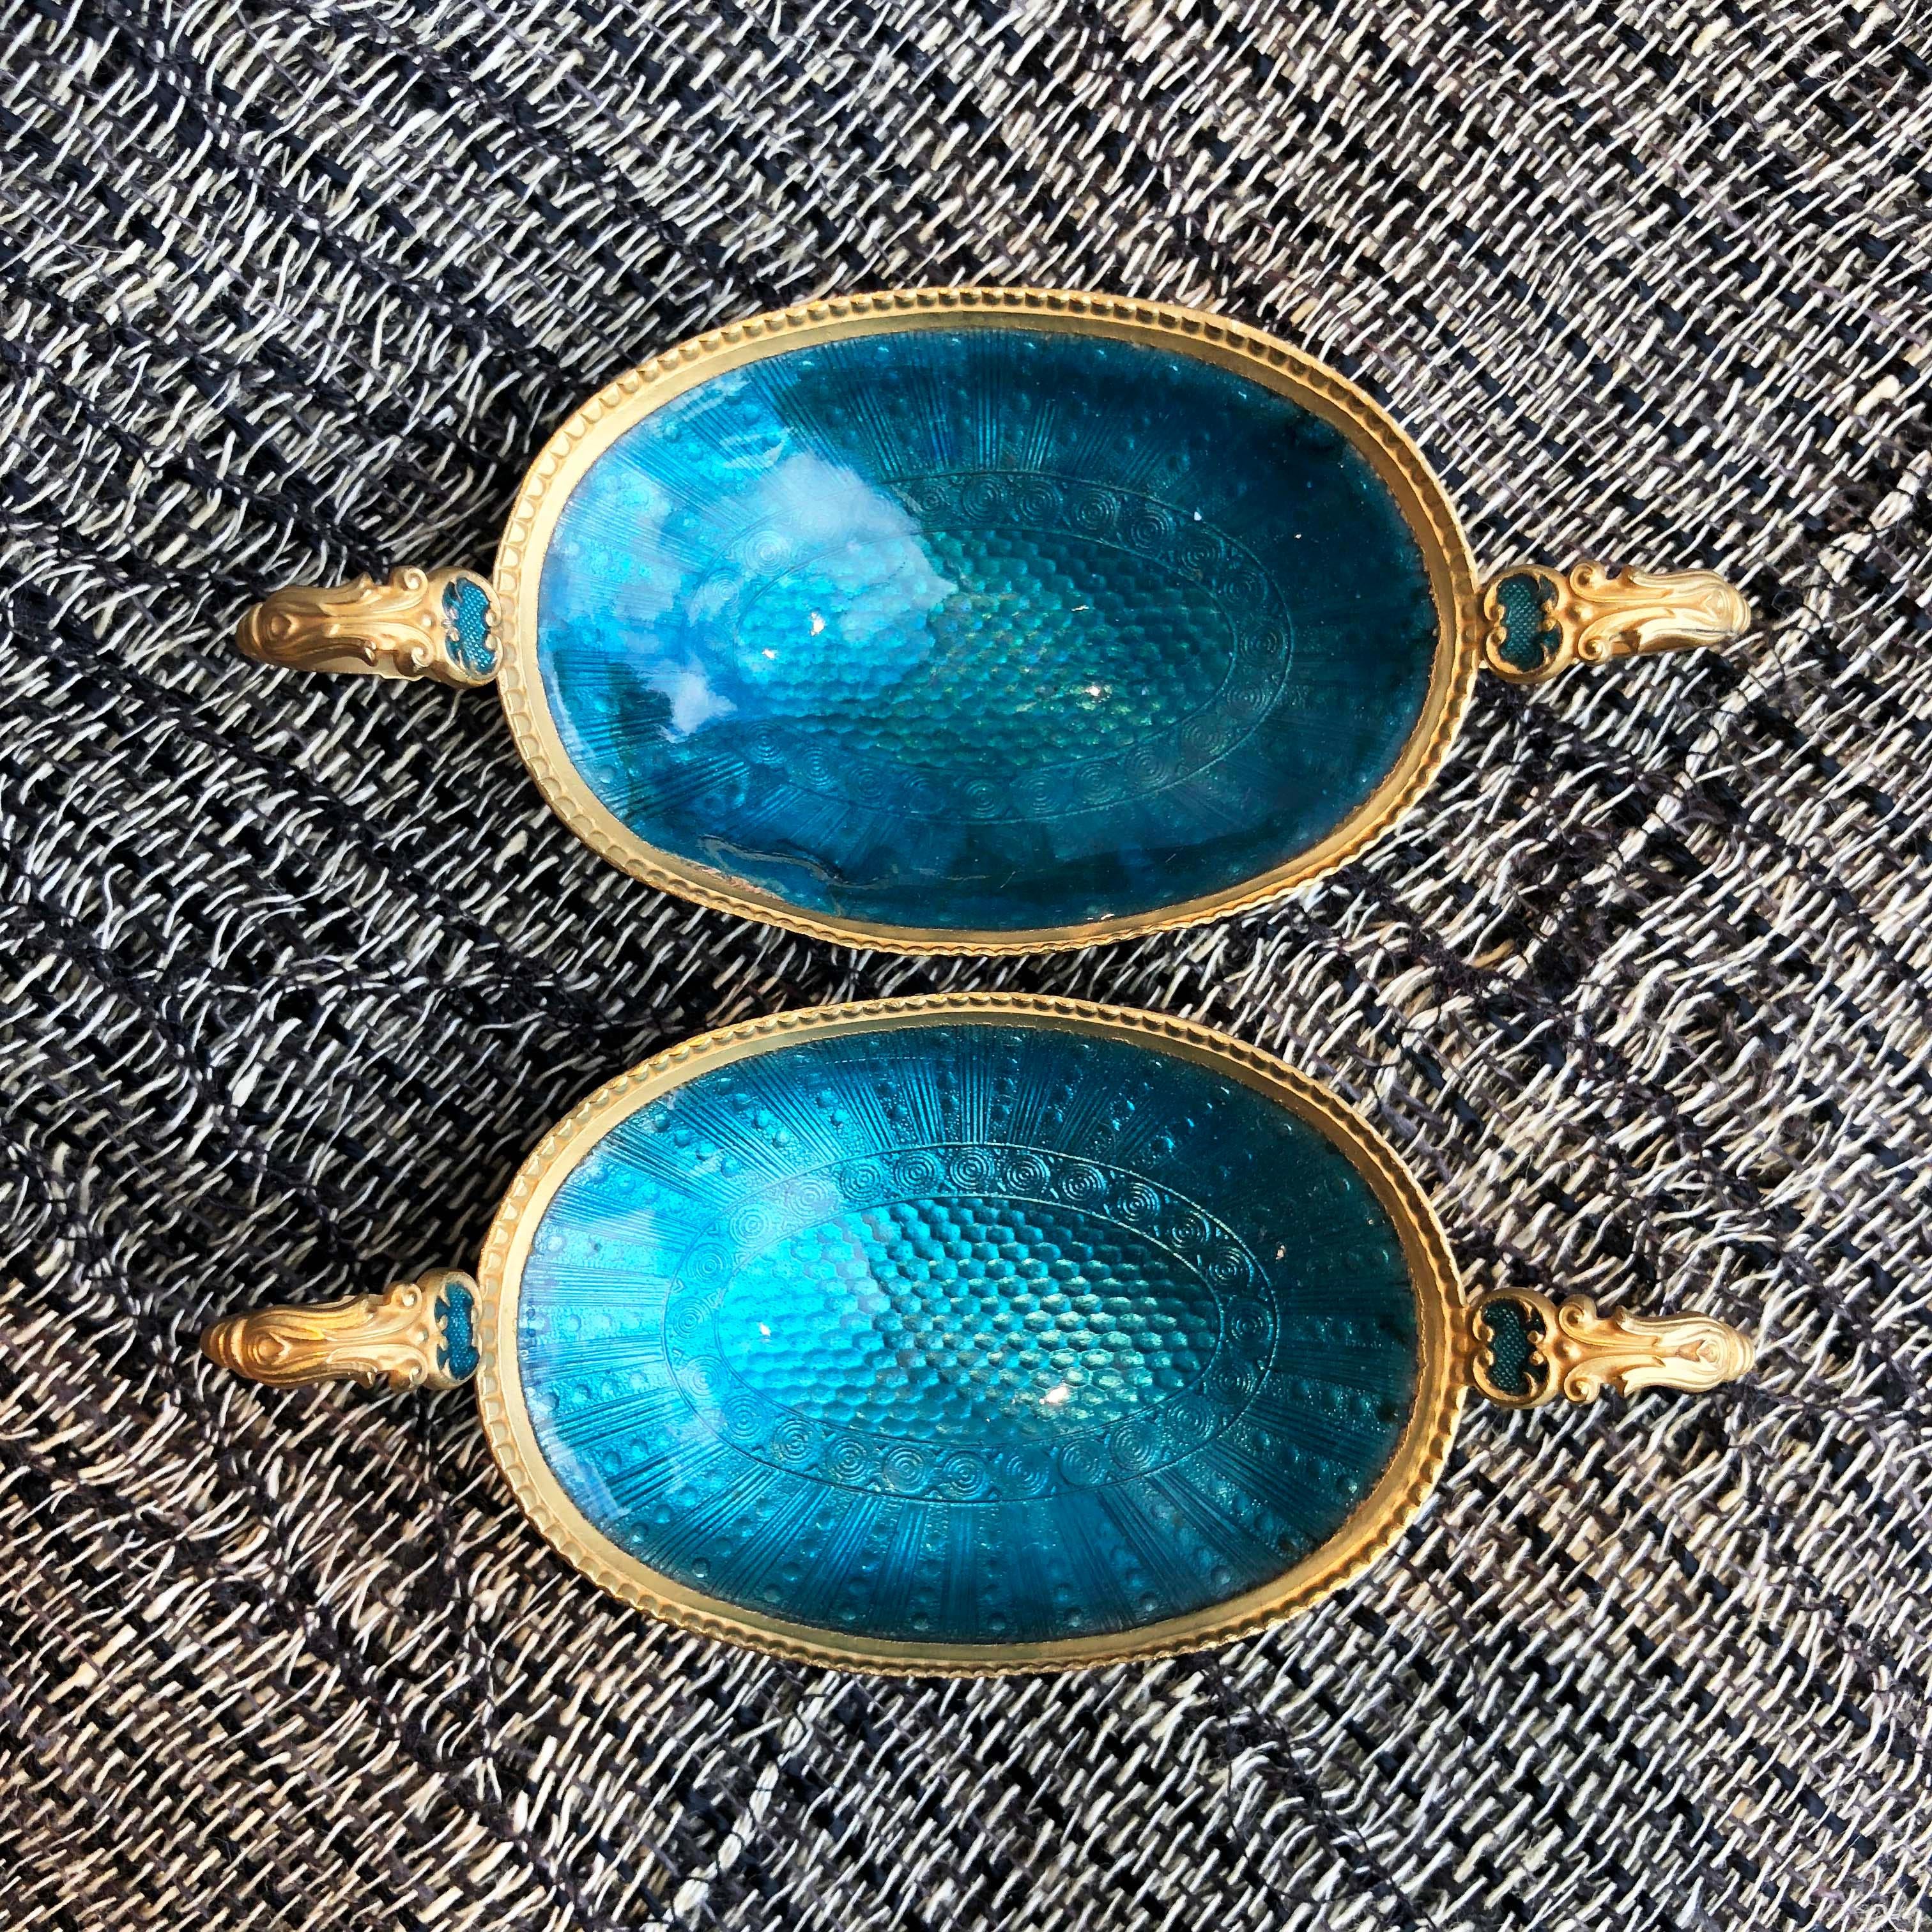 Two pairs of highly collectable salt and pepper dishes from early 1900’s. Gold plated with blue or yellow enamel. Authentication stamp is evident on each dish. Sold as a pair.

10W x 4.5D x 2H cm each

Good antique condition